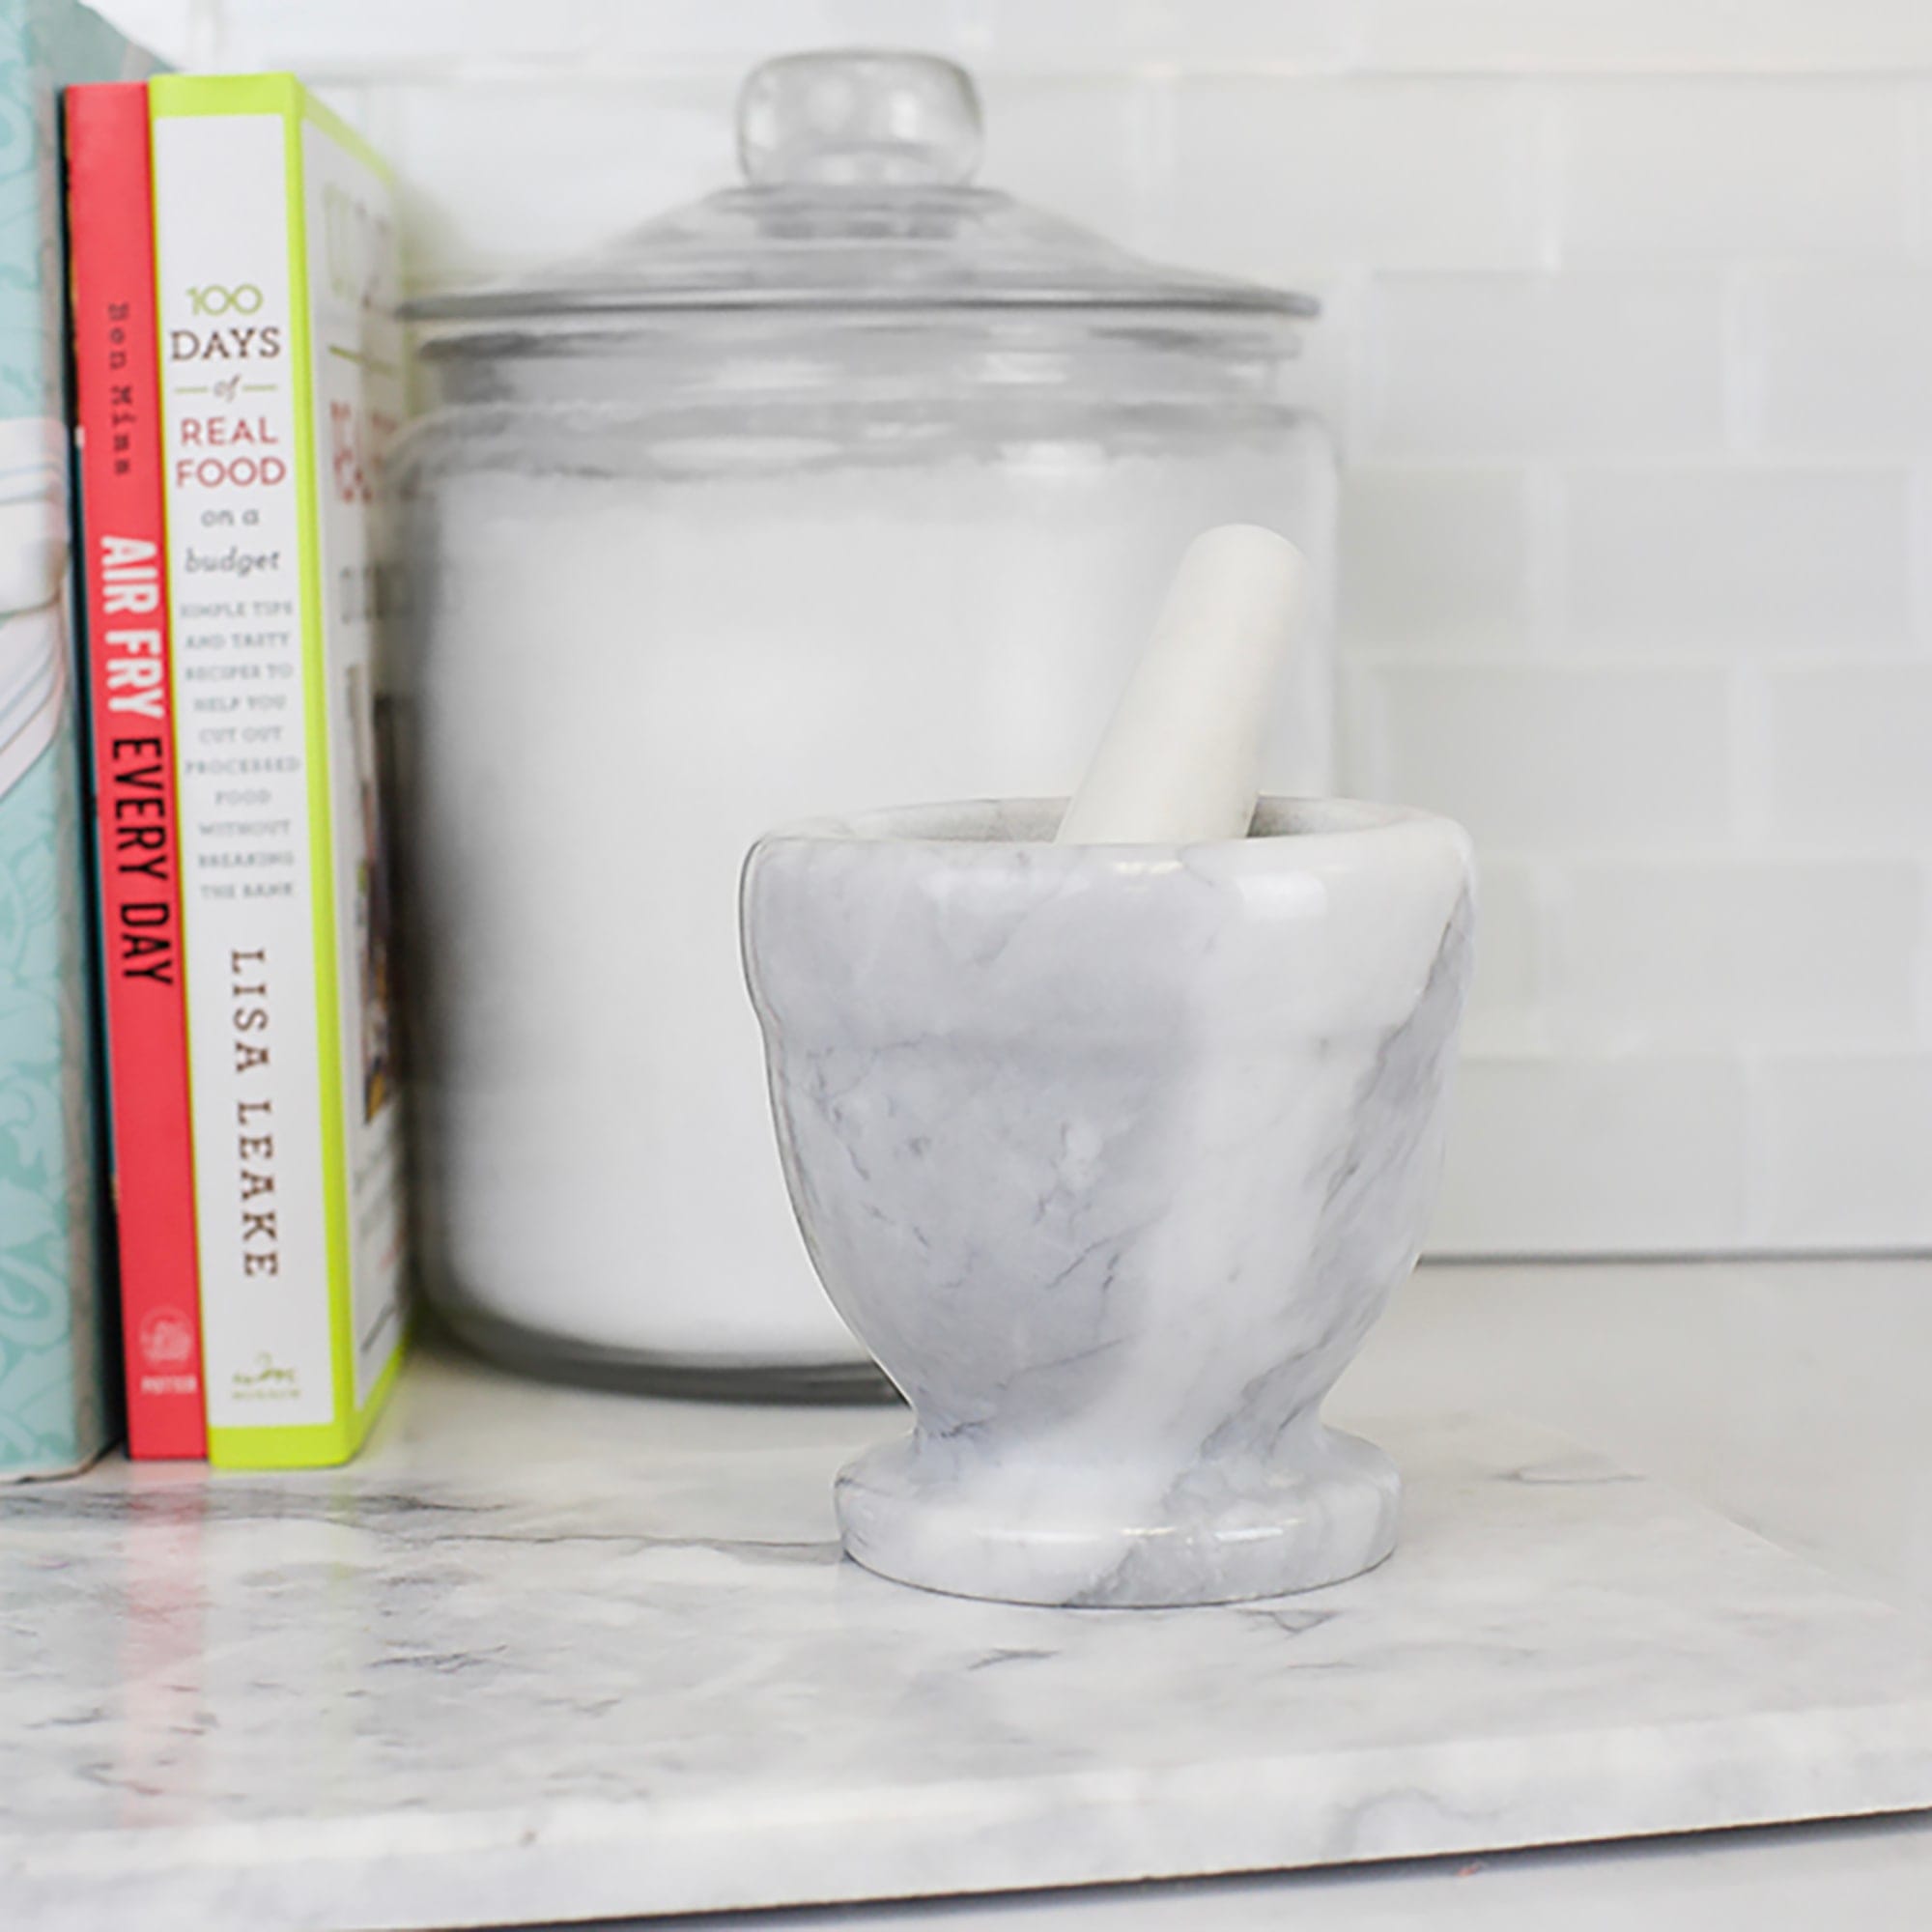 Home Basics Marble Mortar and Pestle, White $6.00 EACH, CASE PACK OF 12